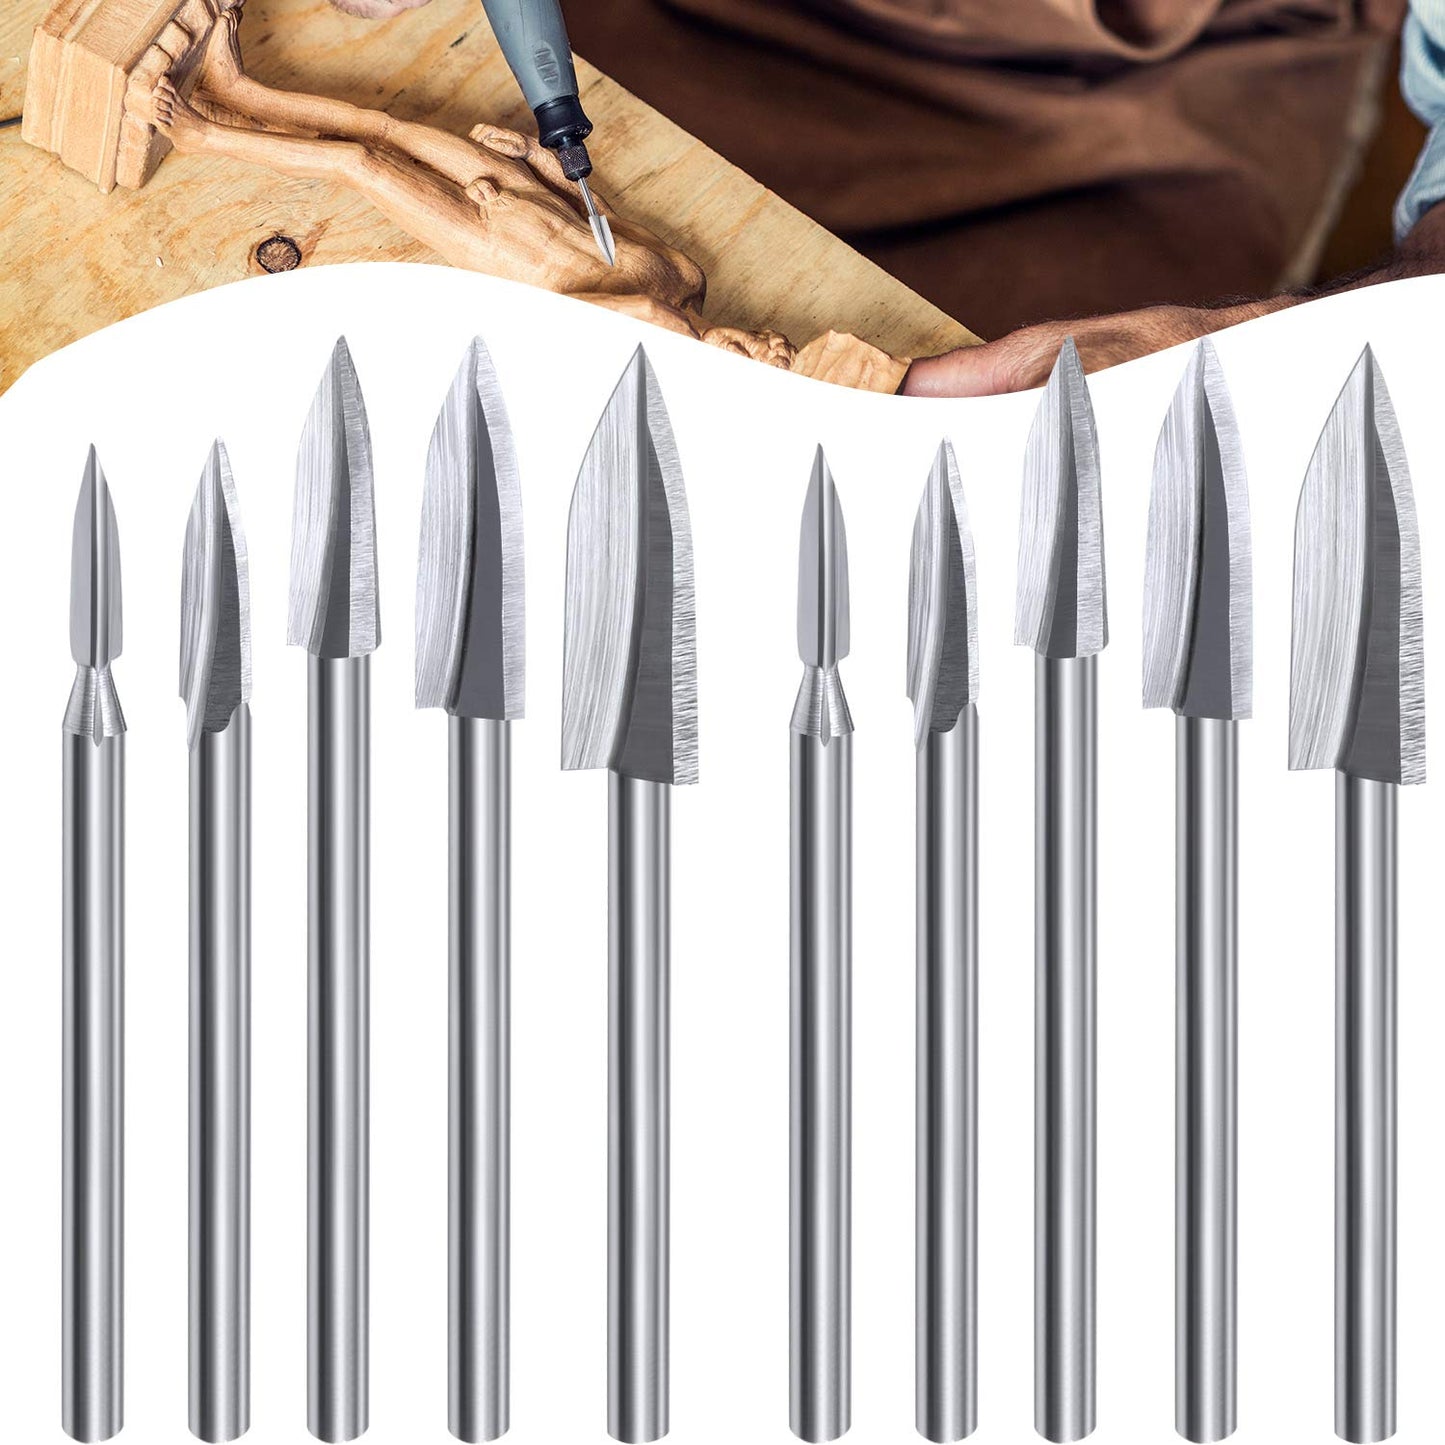 *10 Pieces Wood Carving Drill bits Wood Carving Engraving Tools Rotary Carving bits DIY Woodworking Drill Accessories